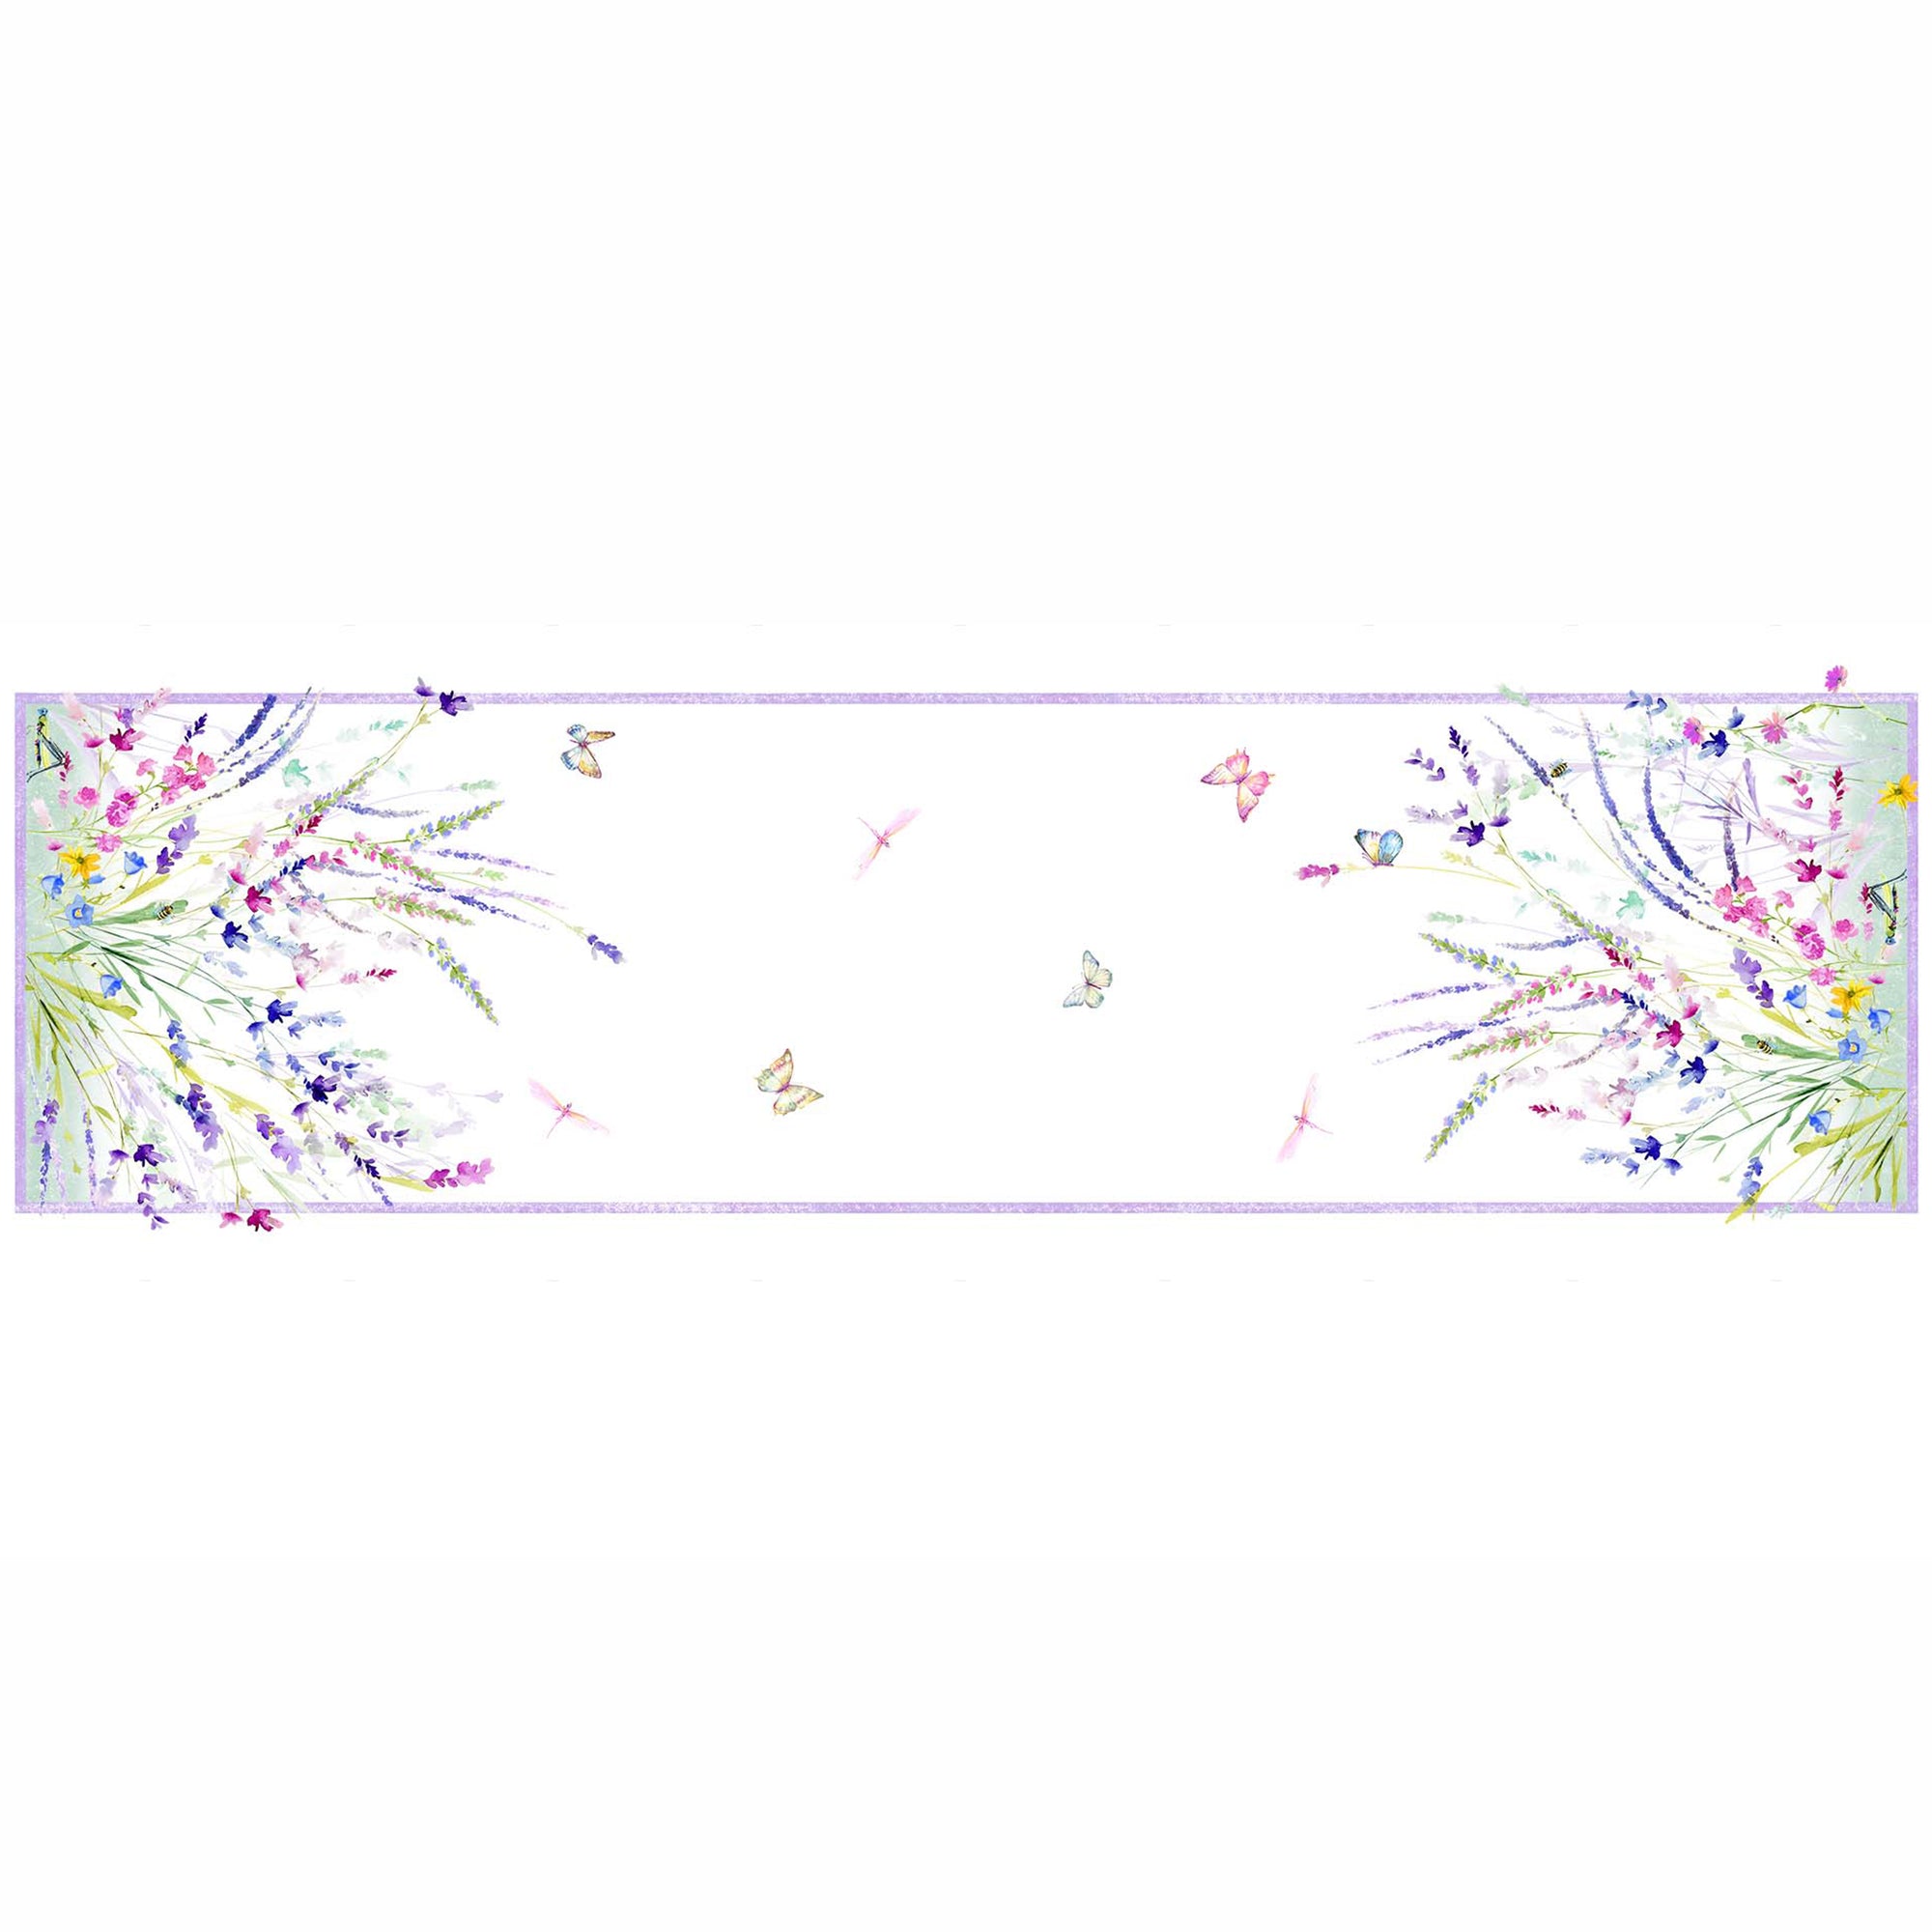 Meadow Tablecloth Runner featuring delicate floral watercolors with butterflies in shades of purple, green, and blue on Italian linen from Caskata